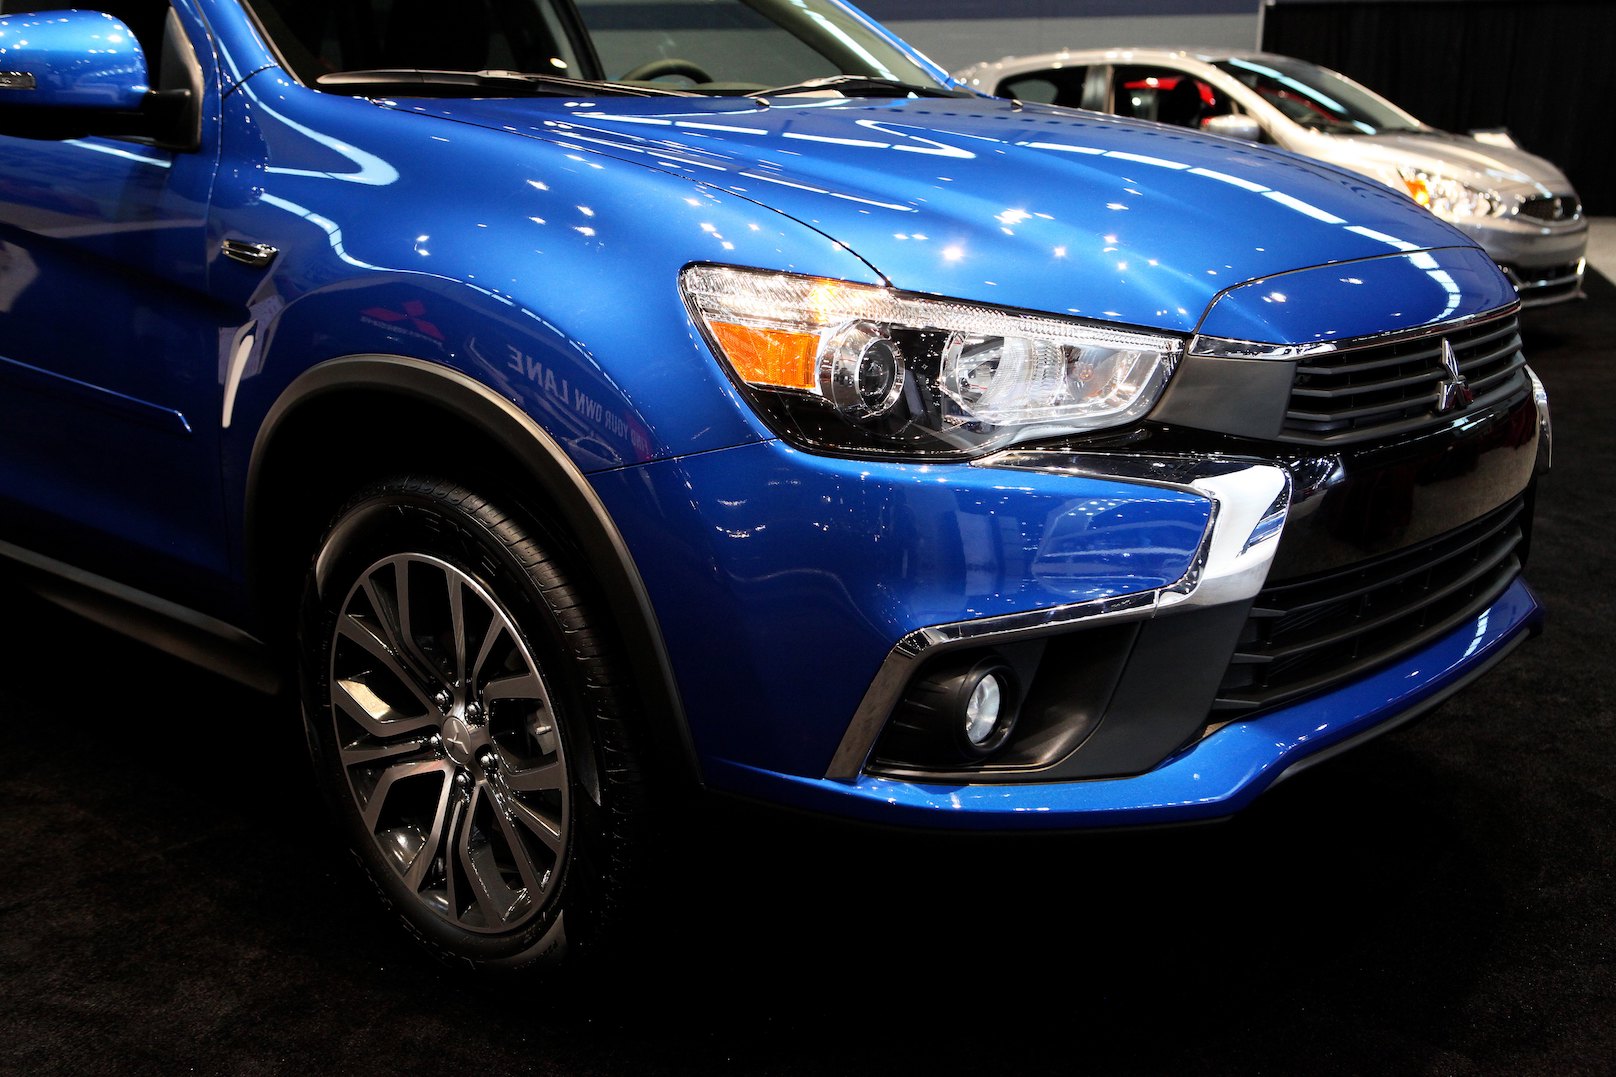 2017 Mitsubishi Outlander Sport is on display at the 109th Annual Chicago Auto Show